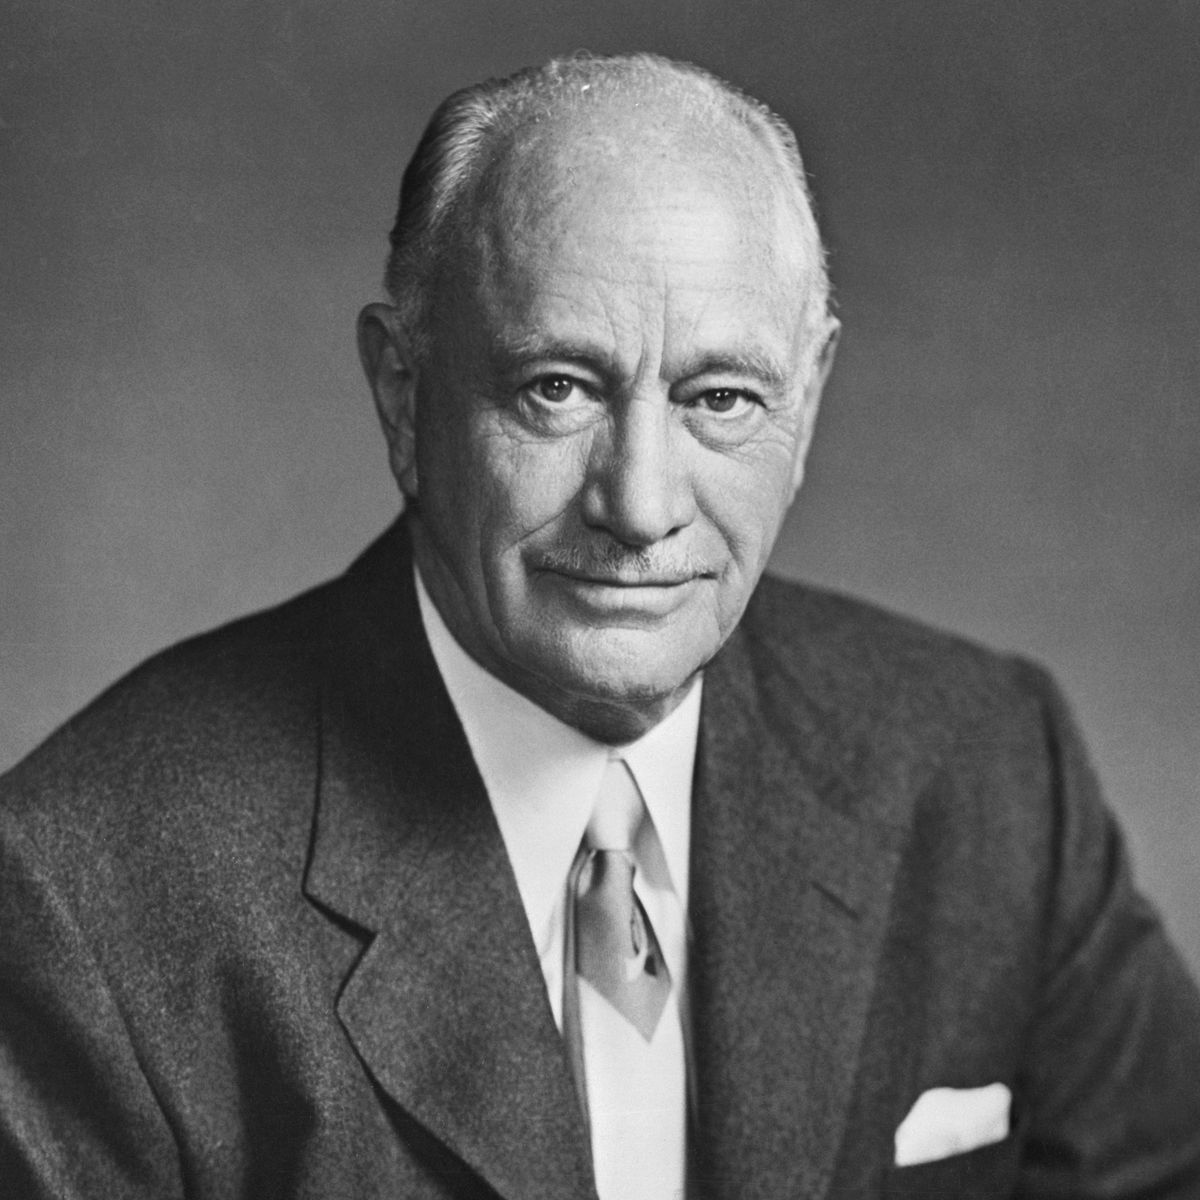 Portrait of Conrad Hilton (Original Caption) The election of Conrad Hilton, head of the world's biggest hotel chain, as Director of the Empire State Building Corporation has been announced by Colonel Henry Crown, President and owner of the world's tallest building.